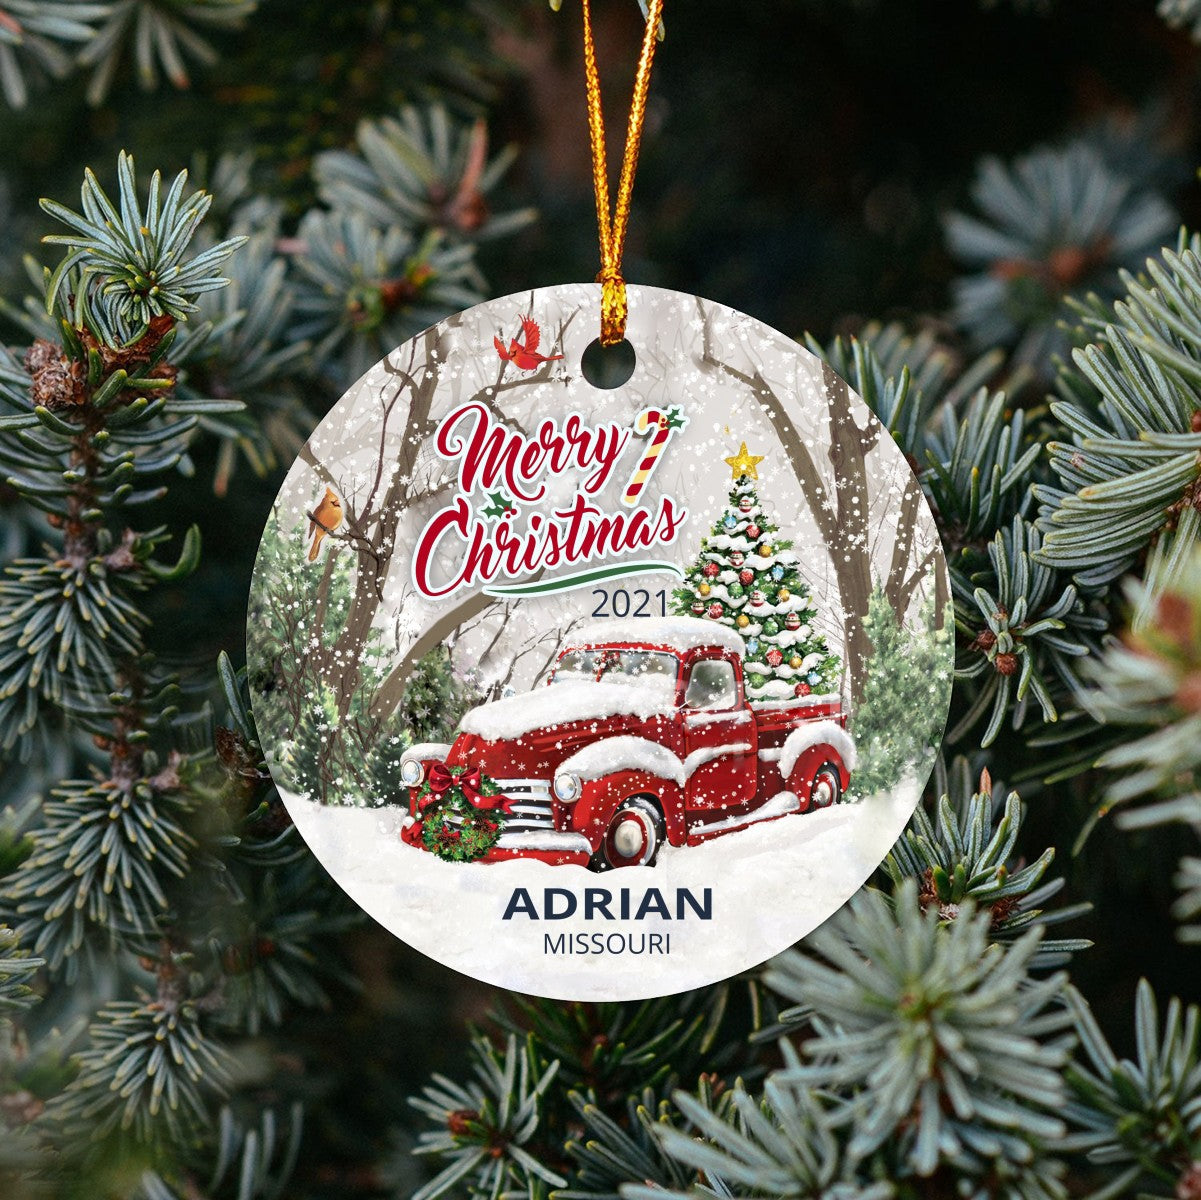 Christmas Tree Ornaments Adrian - Ornament With Name City, State Adrian Missouri MO Ornament - Red Truck Xmas Ornaments 3'' Plastic Gift For Family, Friend And Housewarming